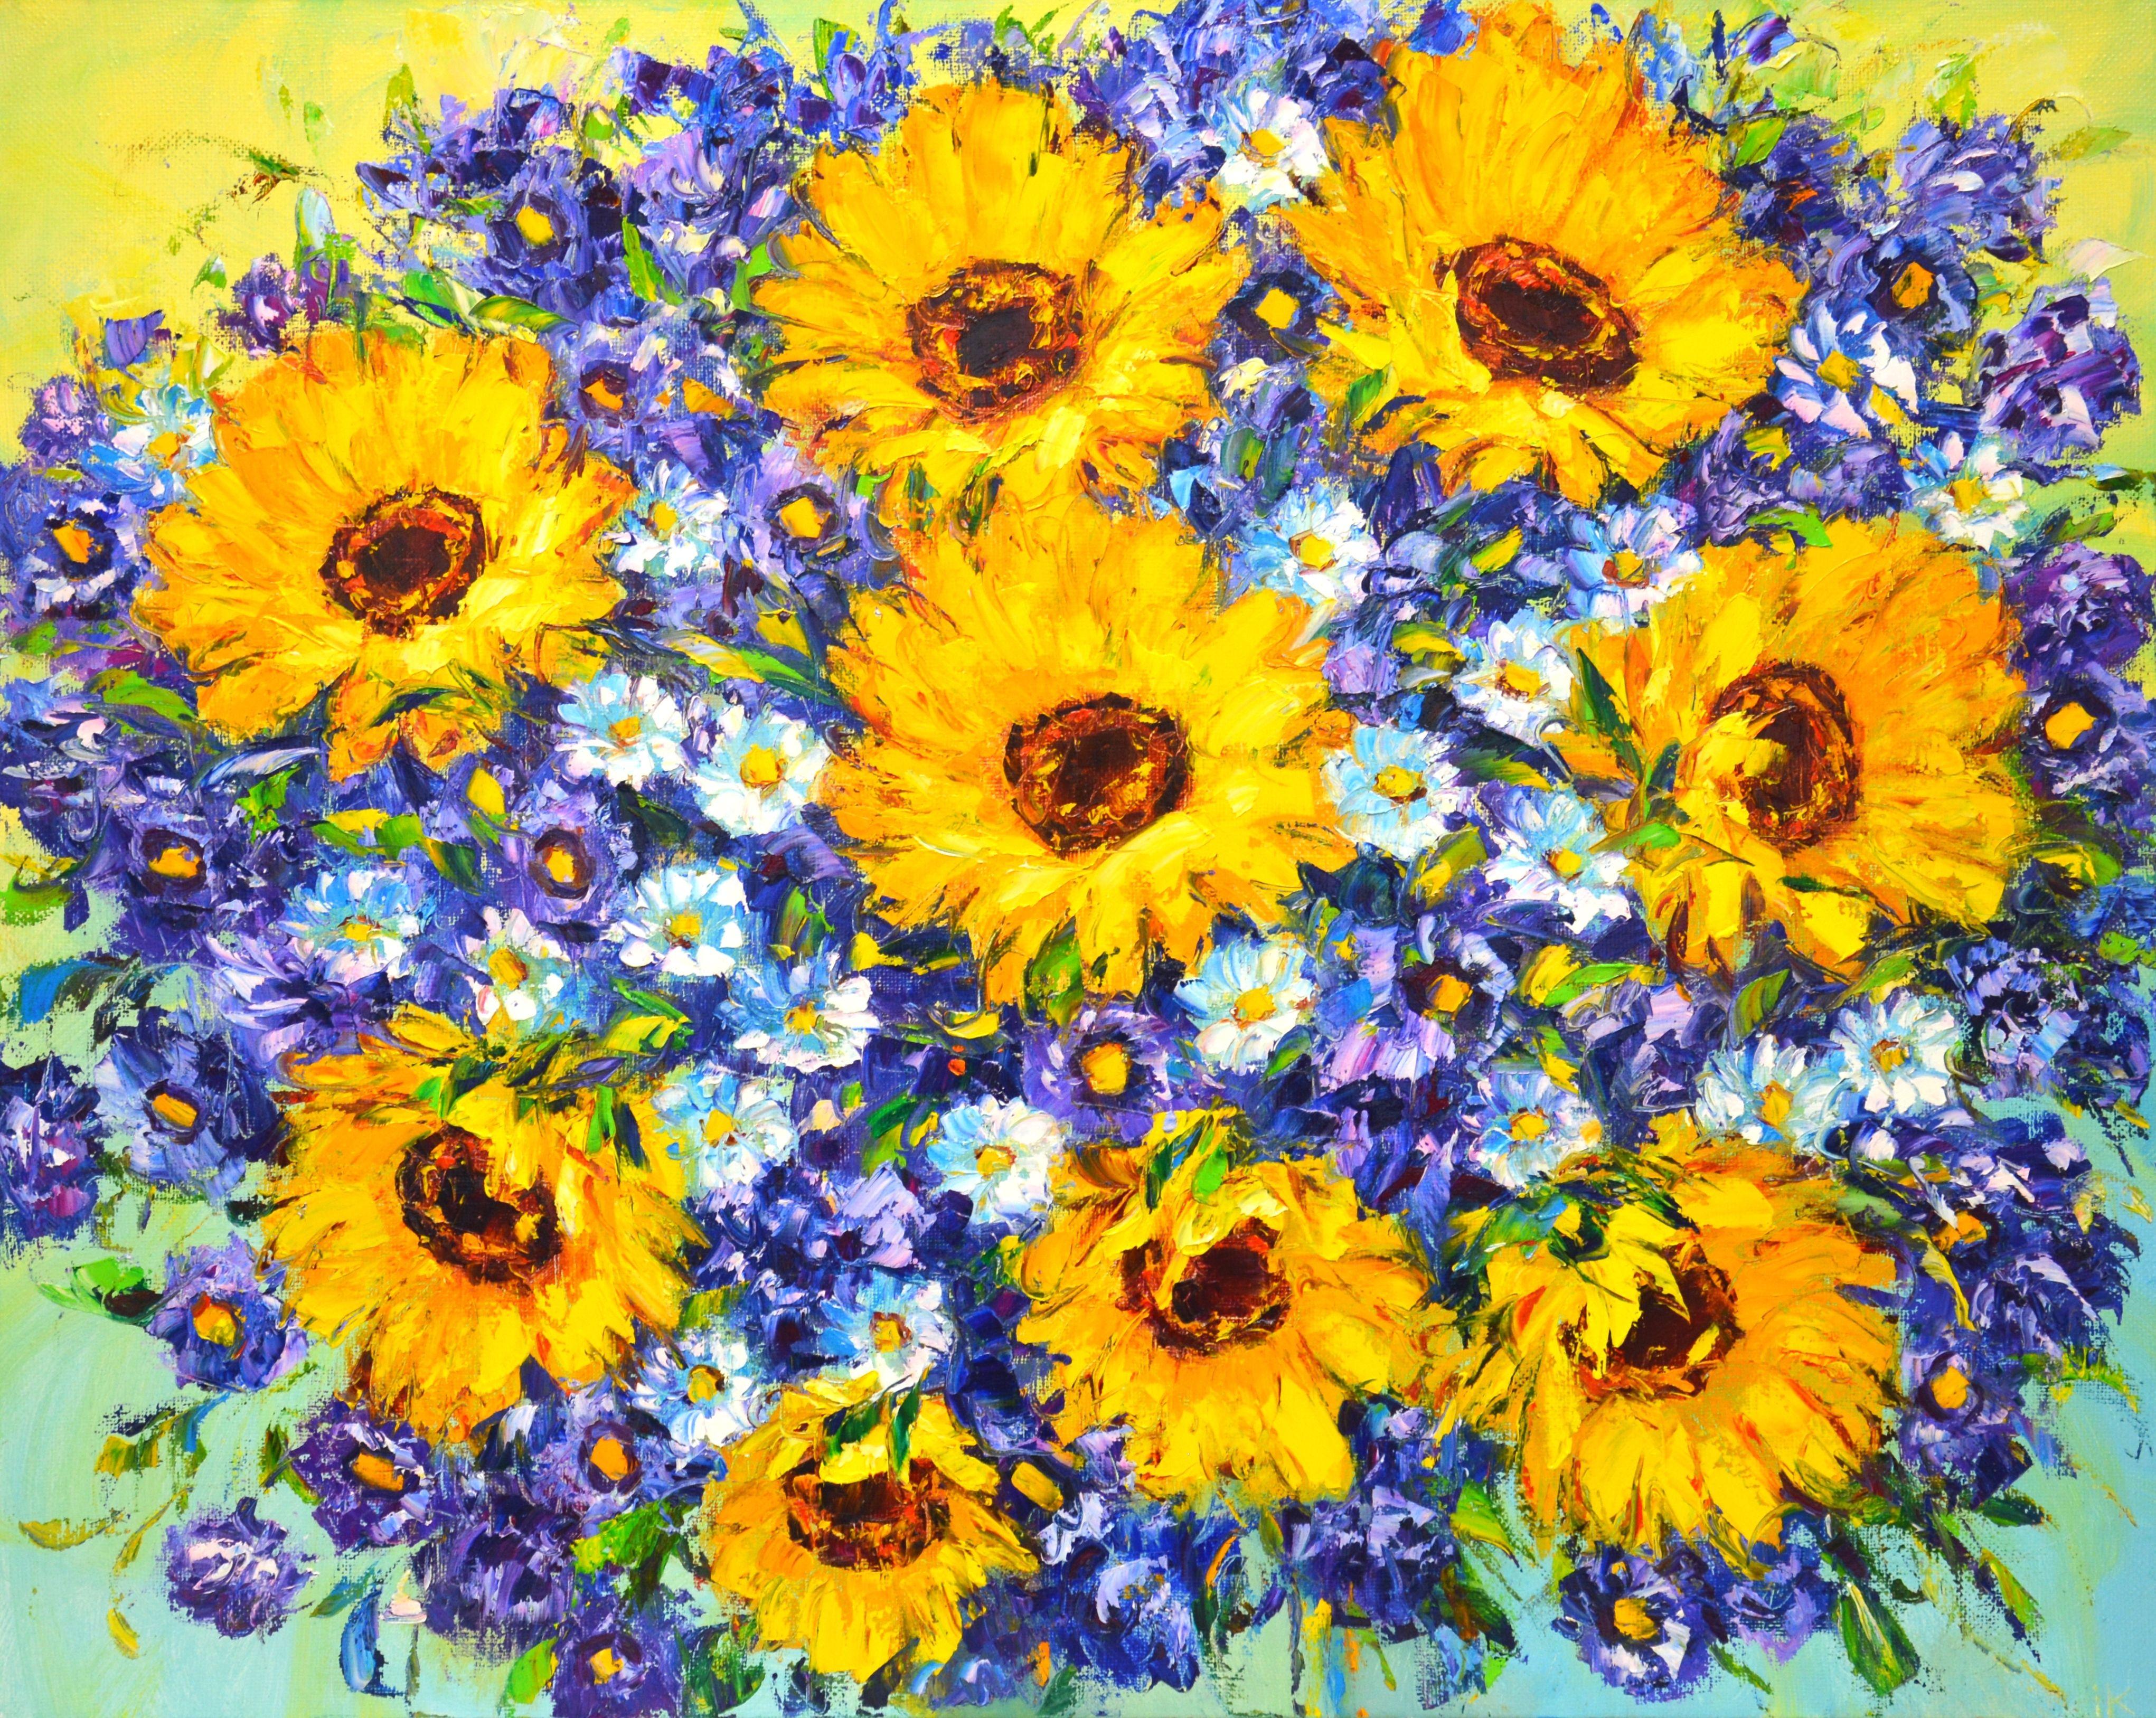 Sunflowers 19. Summer bouquet of bright yellow sunflowers and white daisies, blue asters, presented on an abstract bright background. Flowers painted with a palette knife, textured, create colossal energy in the scene. Impressionism: part of a